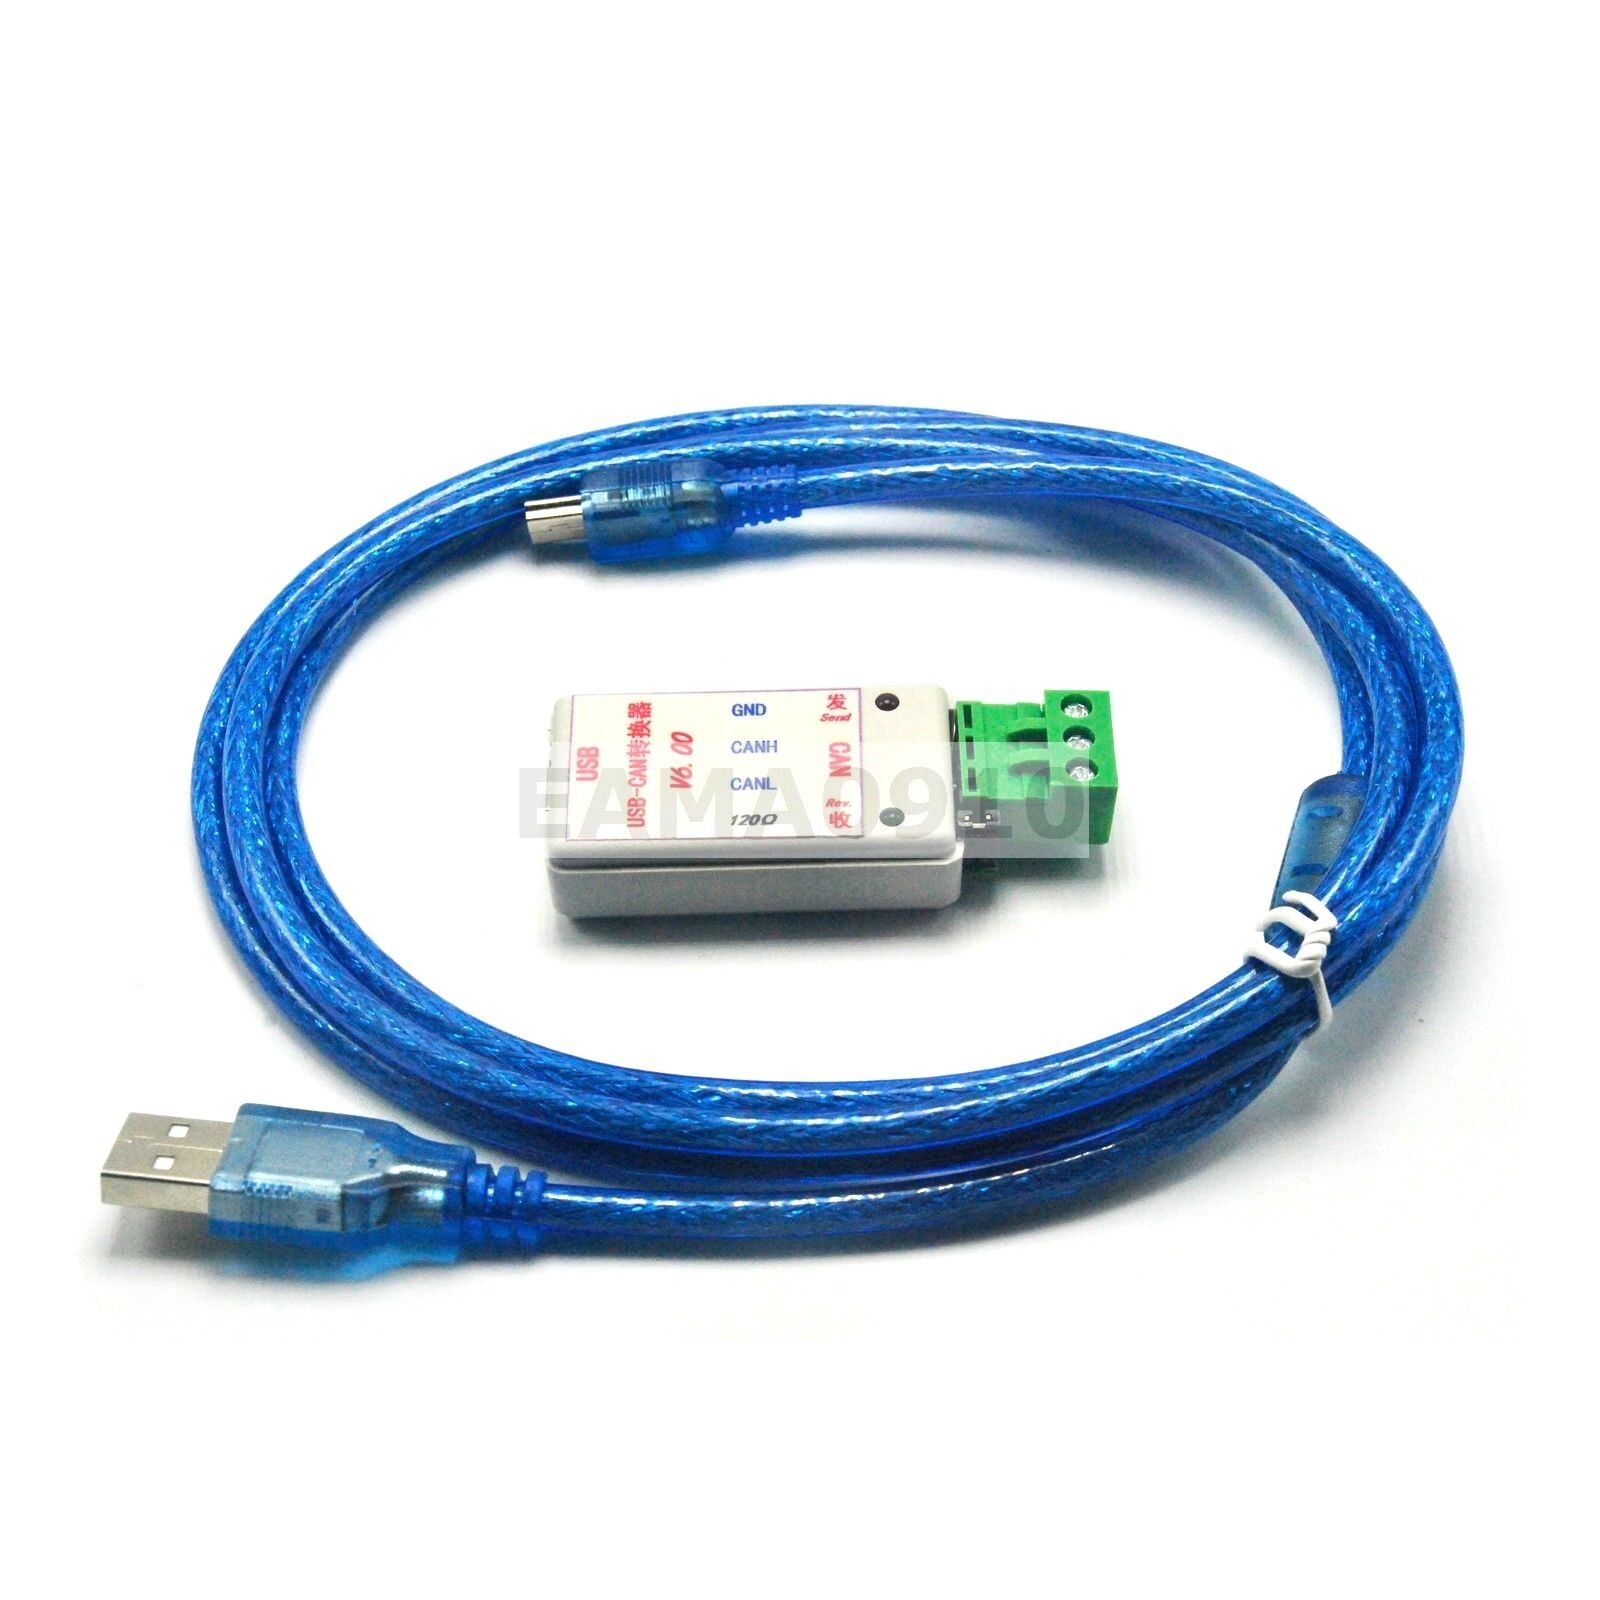 USB-CAN USB to CAN Bus Converter Adapter + USB Cable